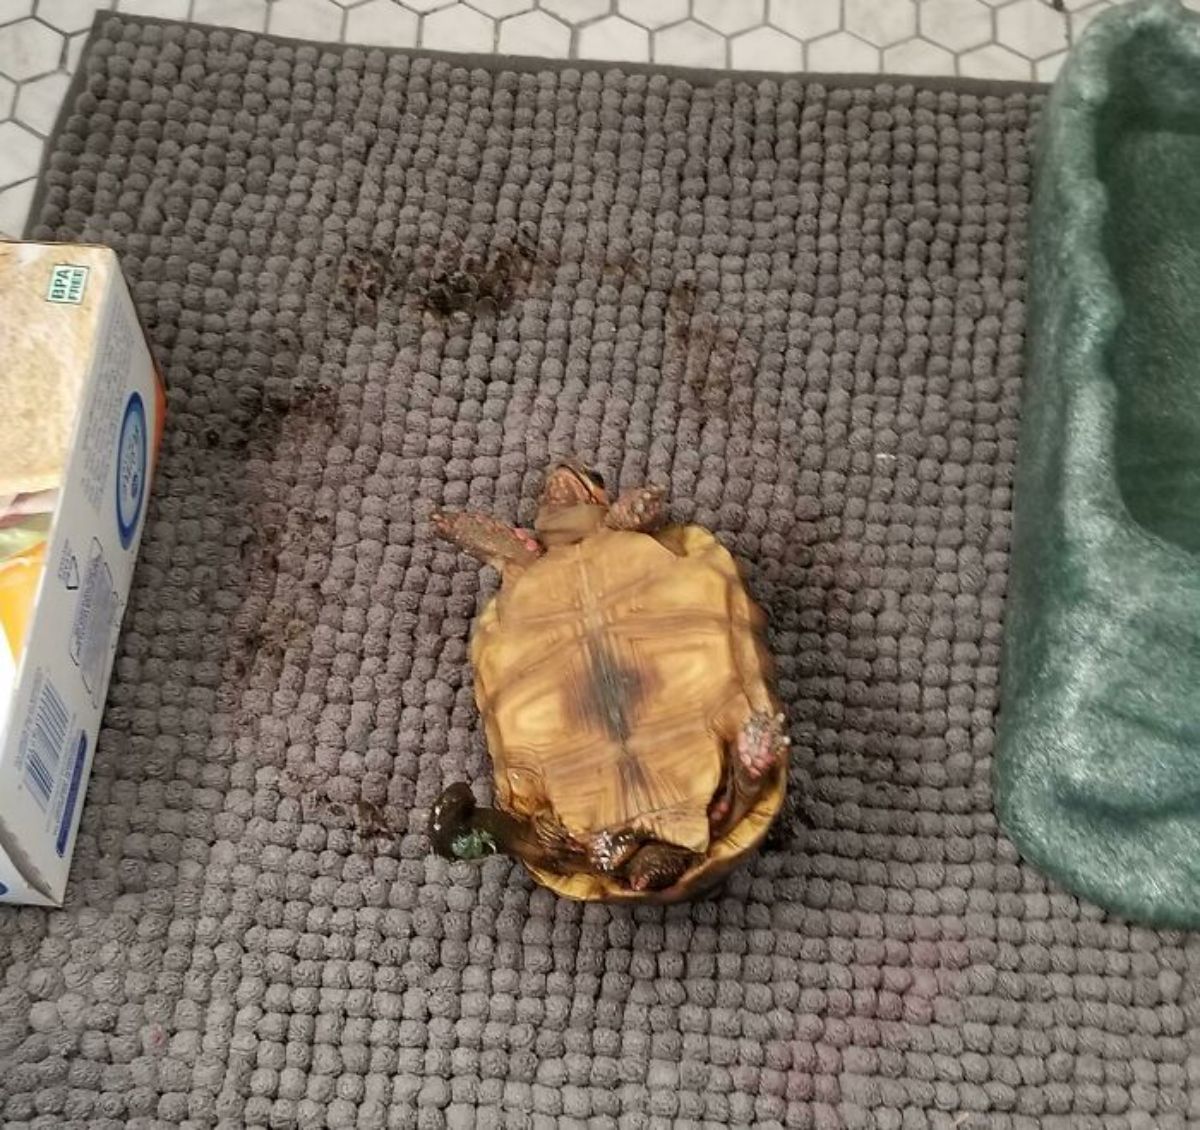 tortoise on a brown carpet upside down with brown marks in a circle around it and some poop on its back foot